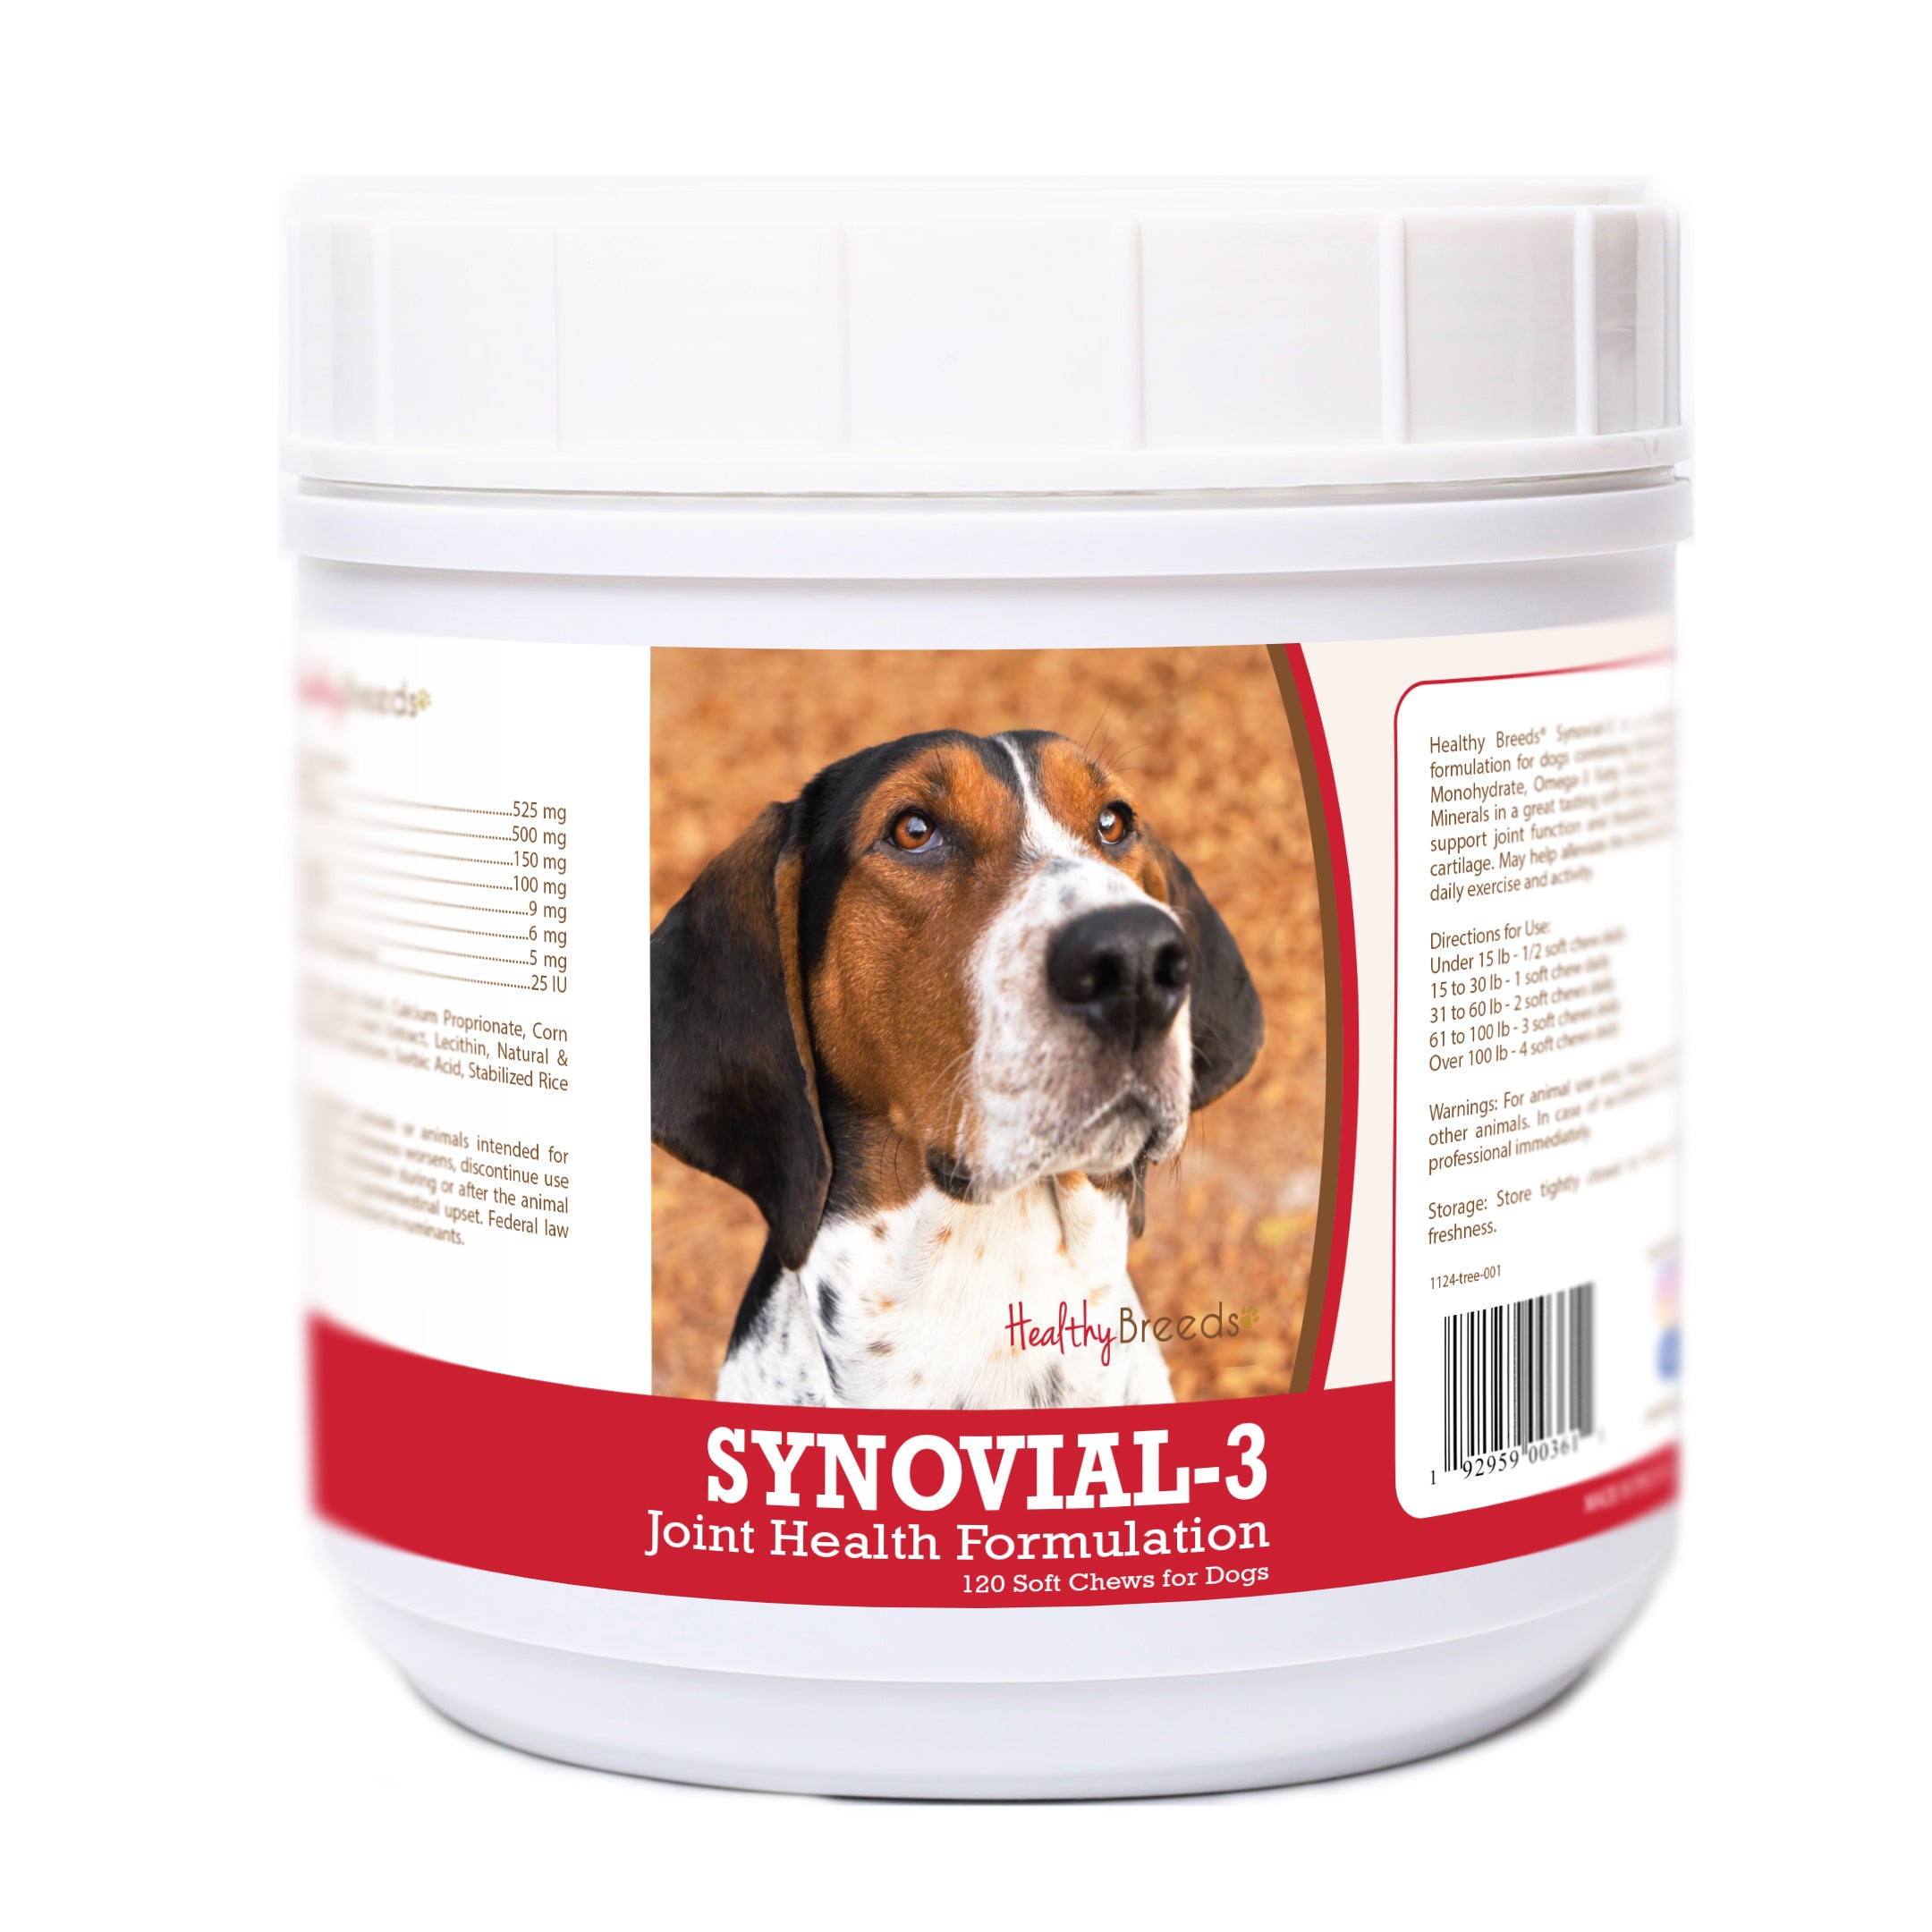 Treeing Walker Coonhound Synovial-3 Joint Health Formulation Soft Chews 120 Count